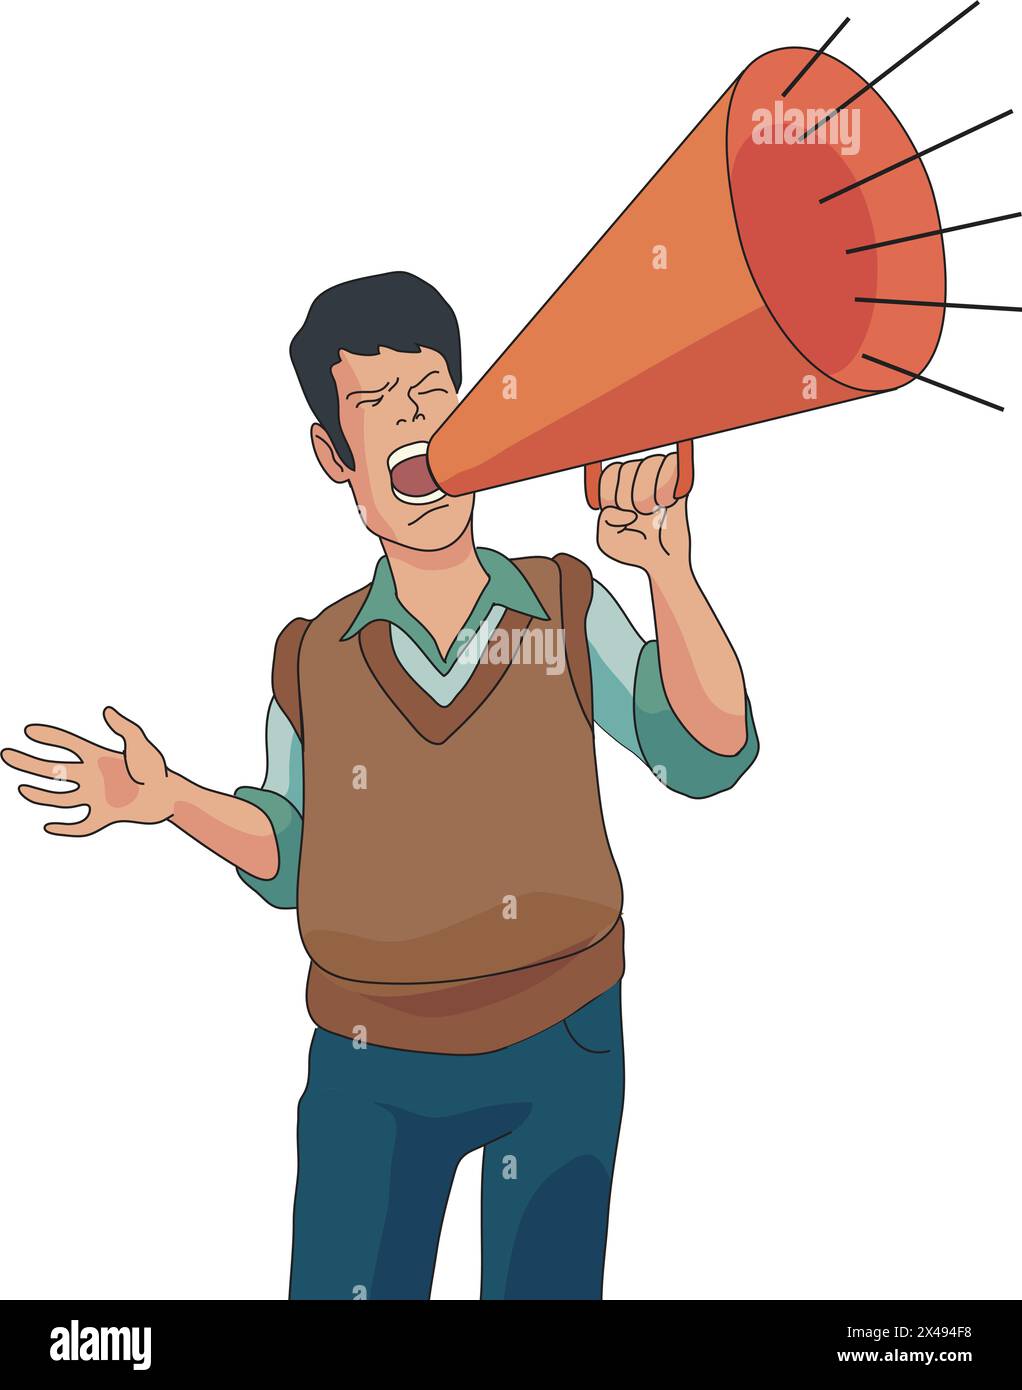 A man shouting loudly on a speaker Stock Vector